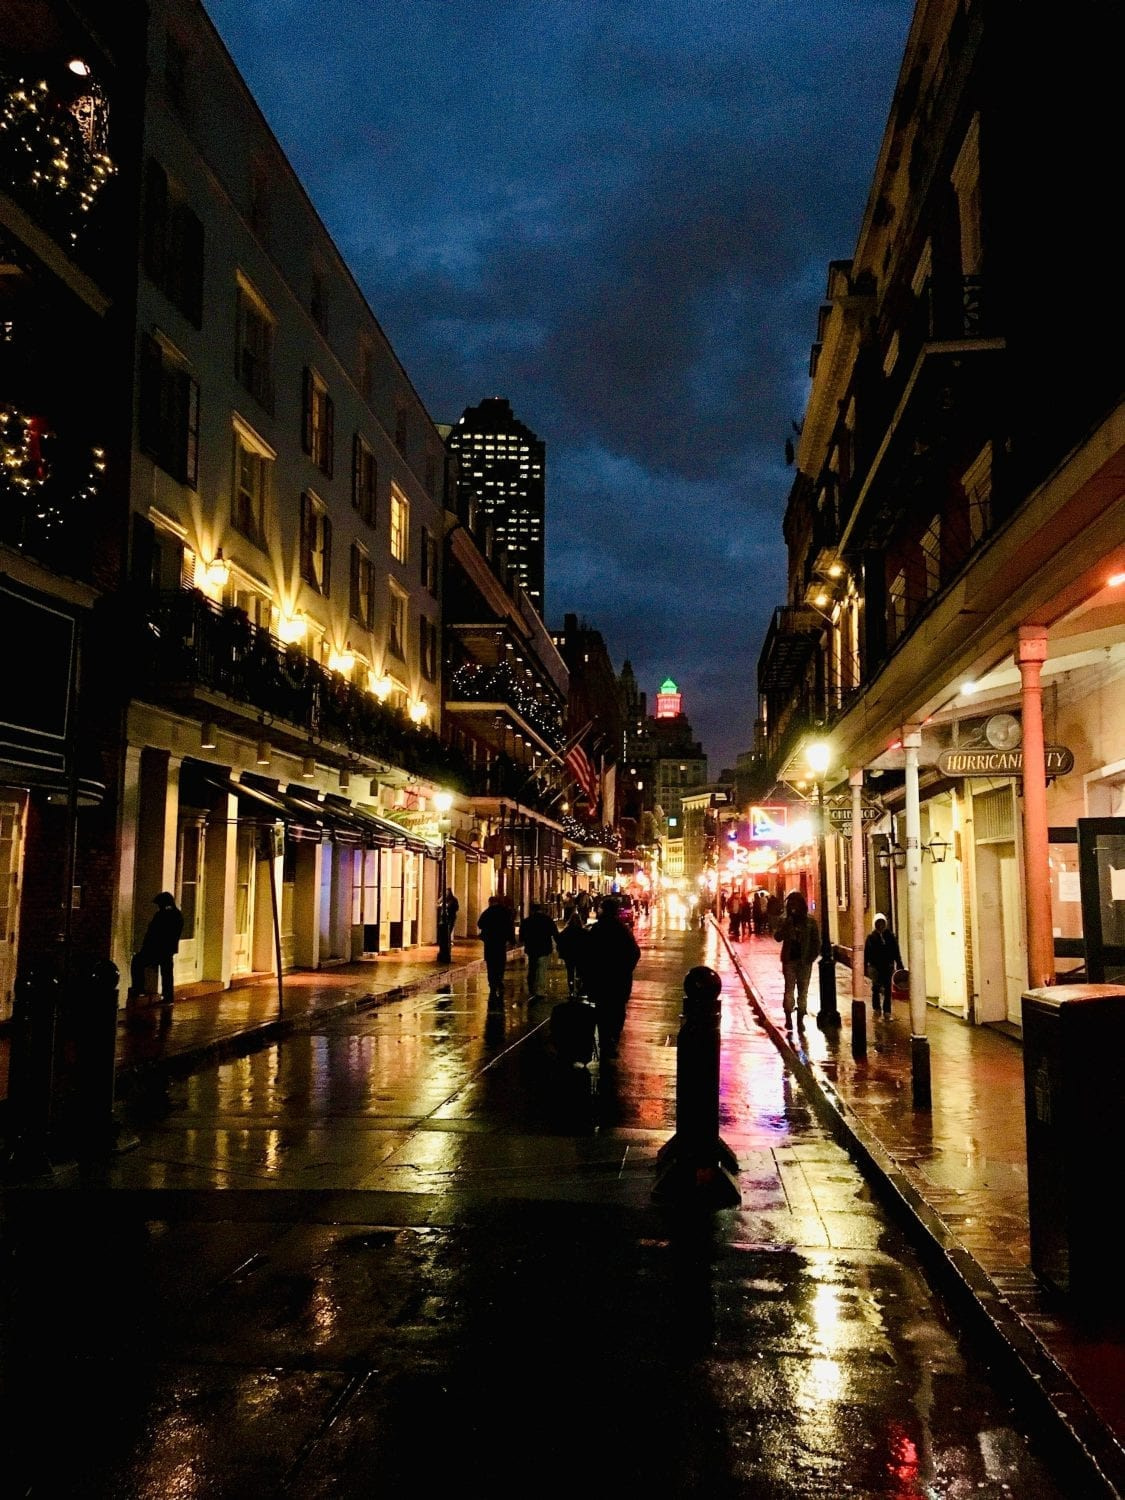 haunted history tours new orleans review